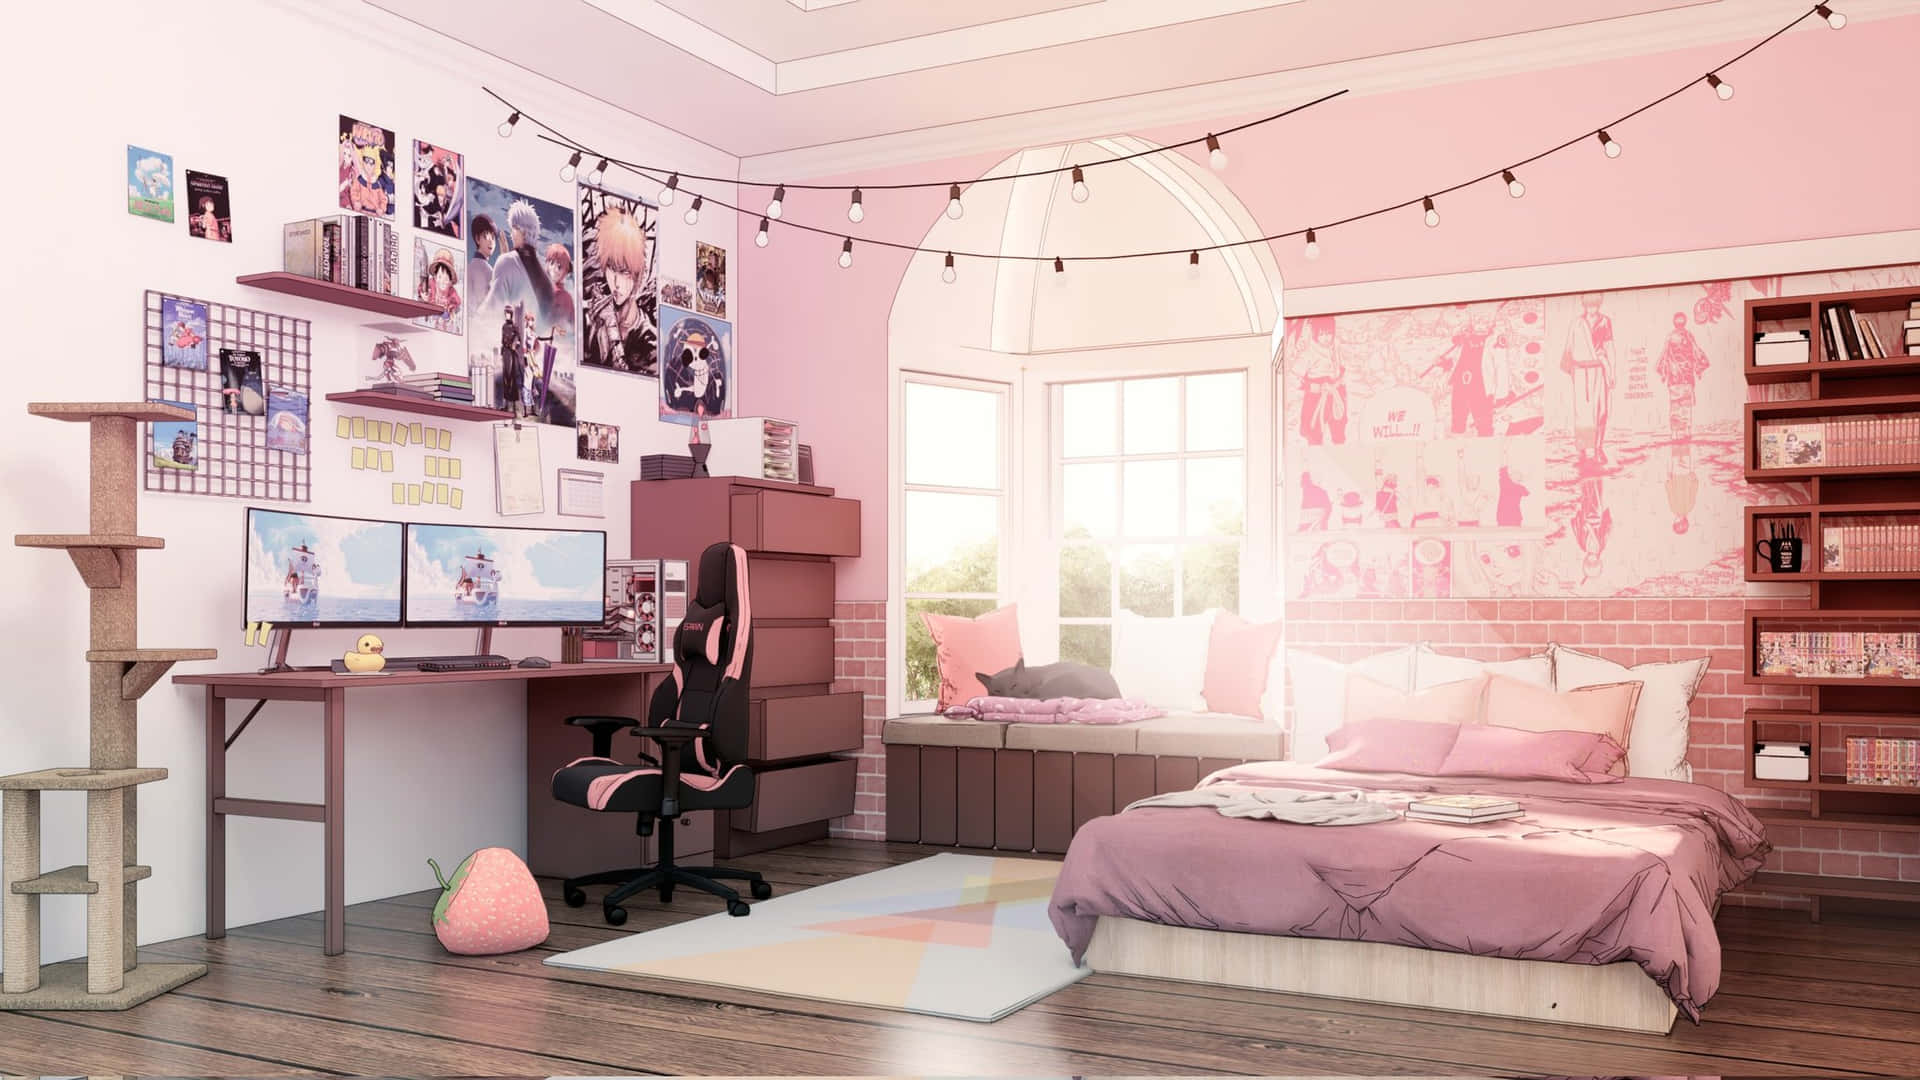 Download A Pink Bedroom With A Desk And A Cat | Wallpapers.com